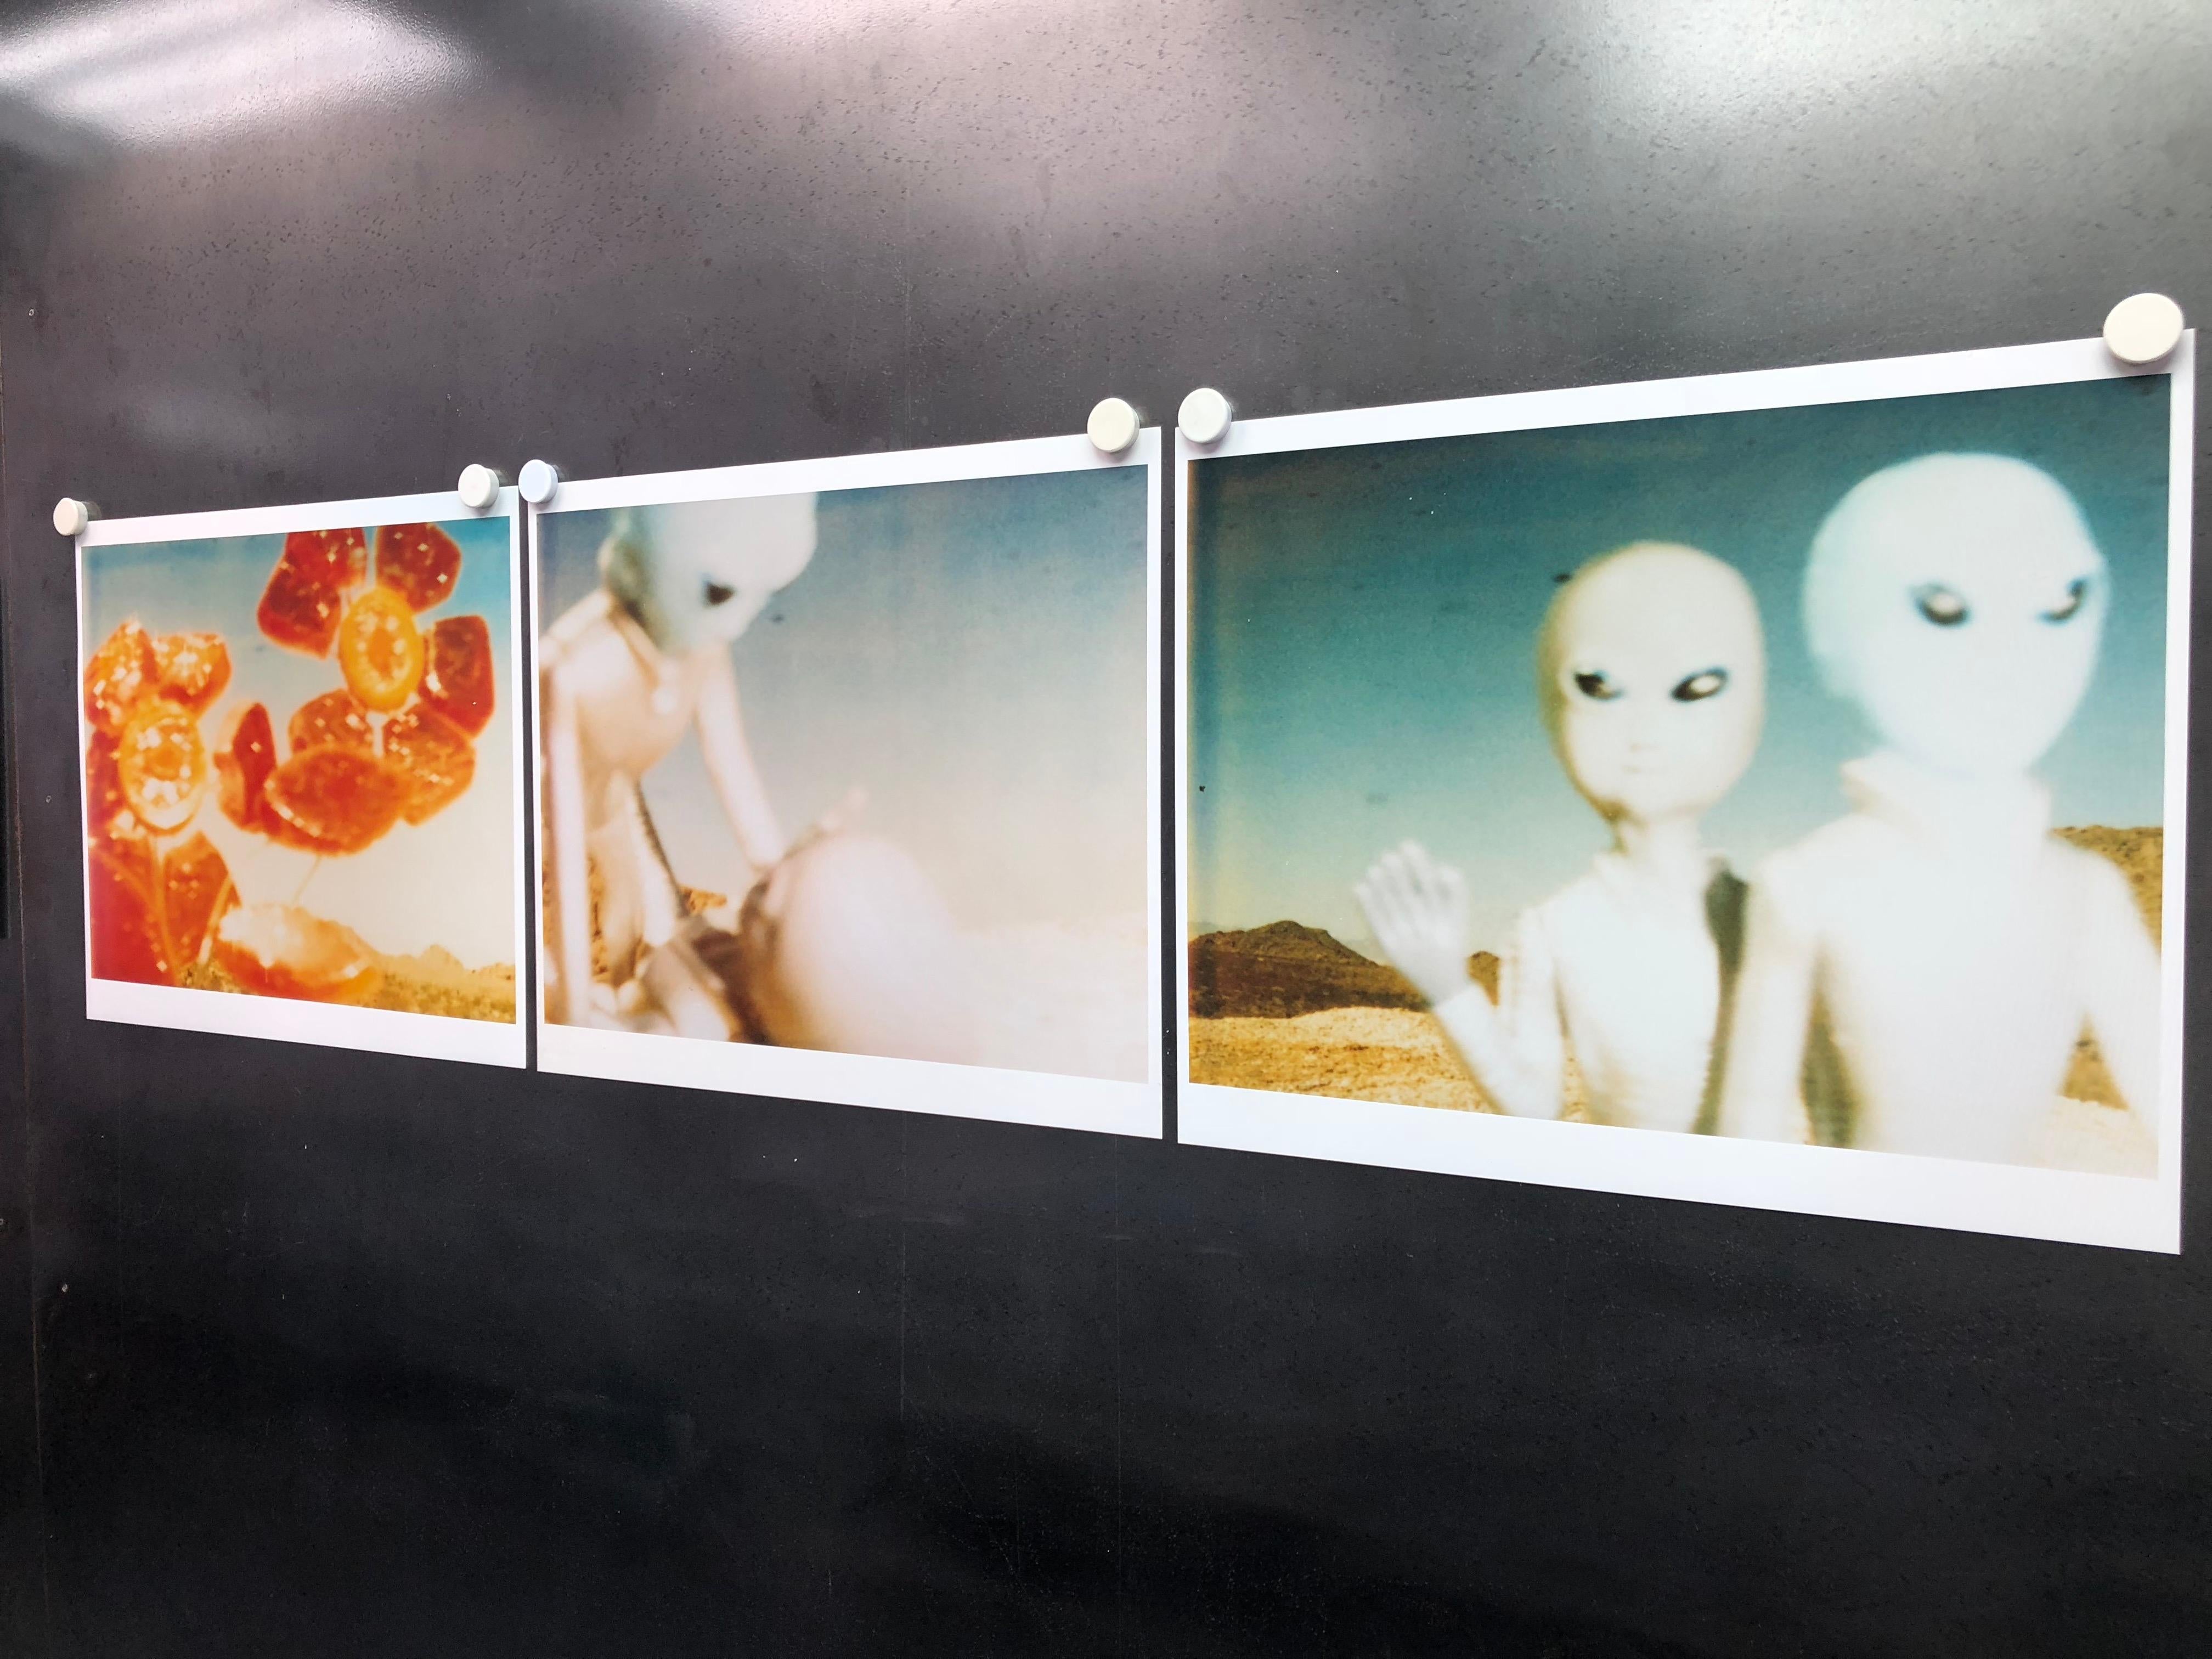 Aliens - triptych - 1998, 

Edition 2/5, 48x59cm each, 48x190 installed including the gaps.
Analog C-Prints, hand-printed by the artist on Fuji Crystal Archive Paper, matte finish, based on 3 Polaroids.
Certificate and signature label.
Artist